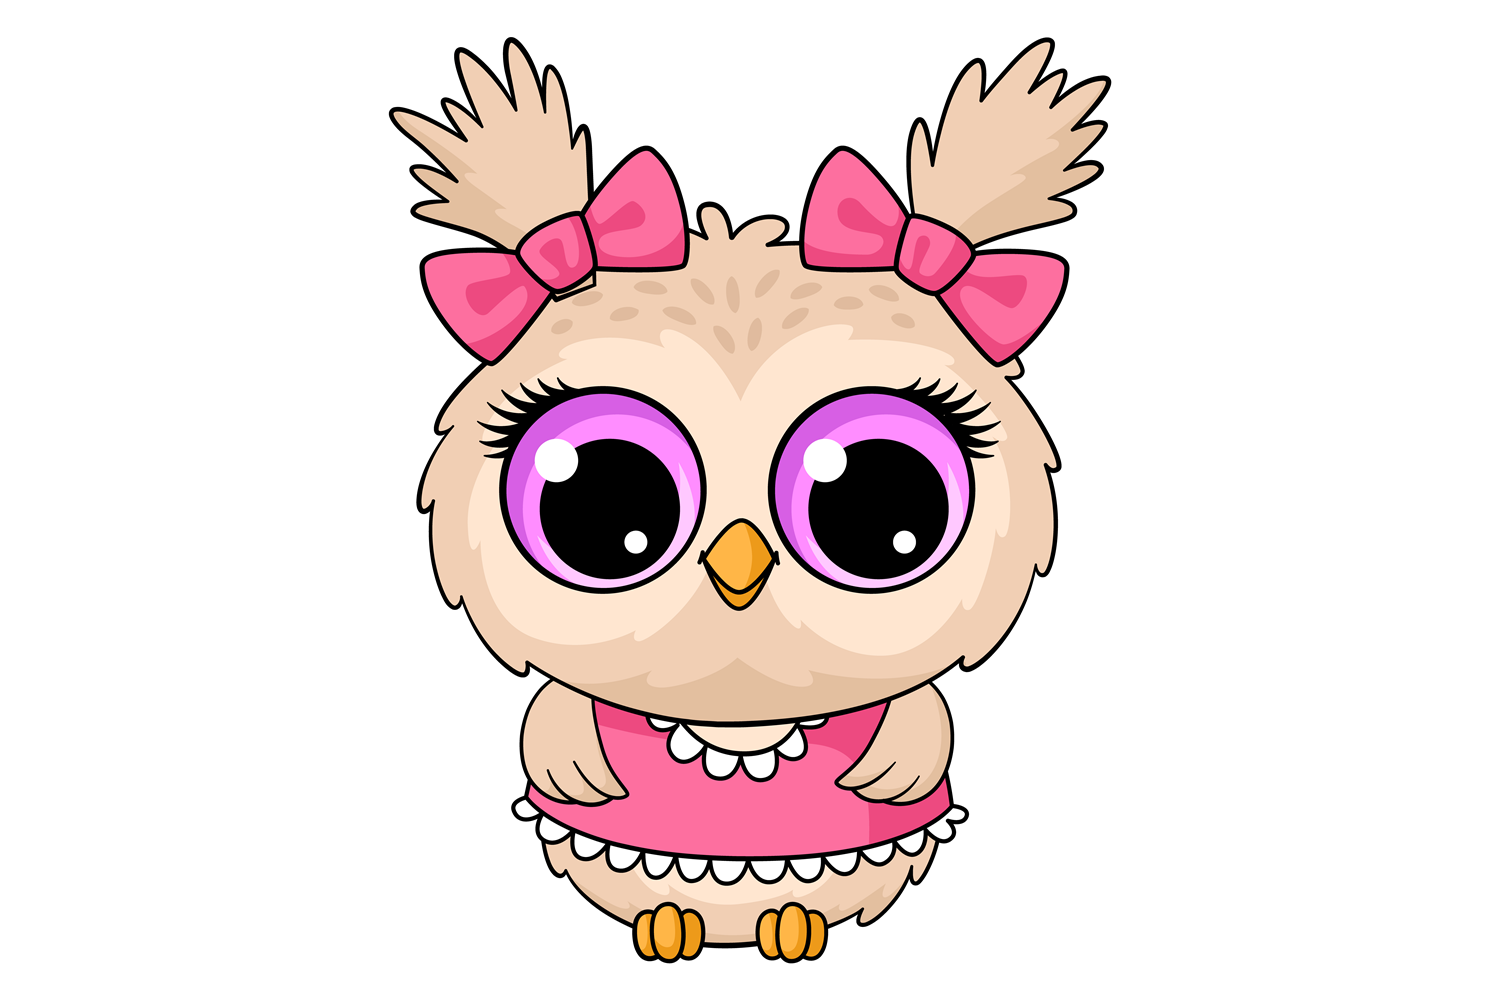 Cute Baby Owl in Girly Pink Clothes. Fun Graphic by ladadikart ...